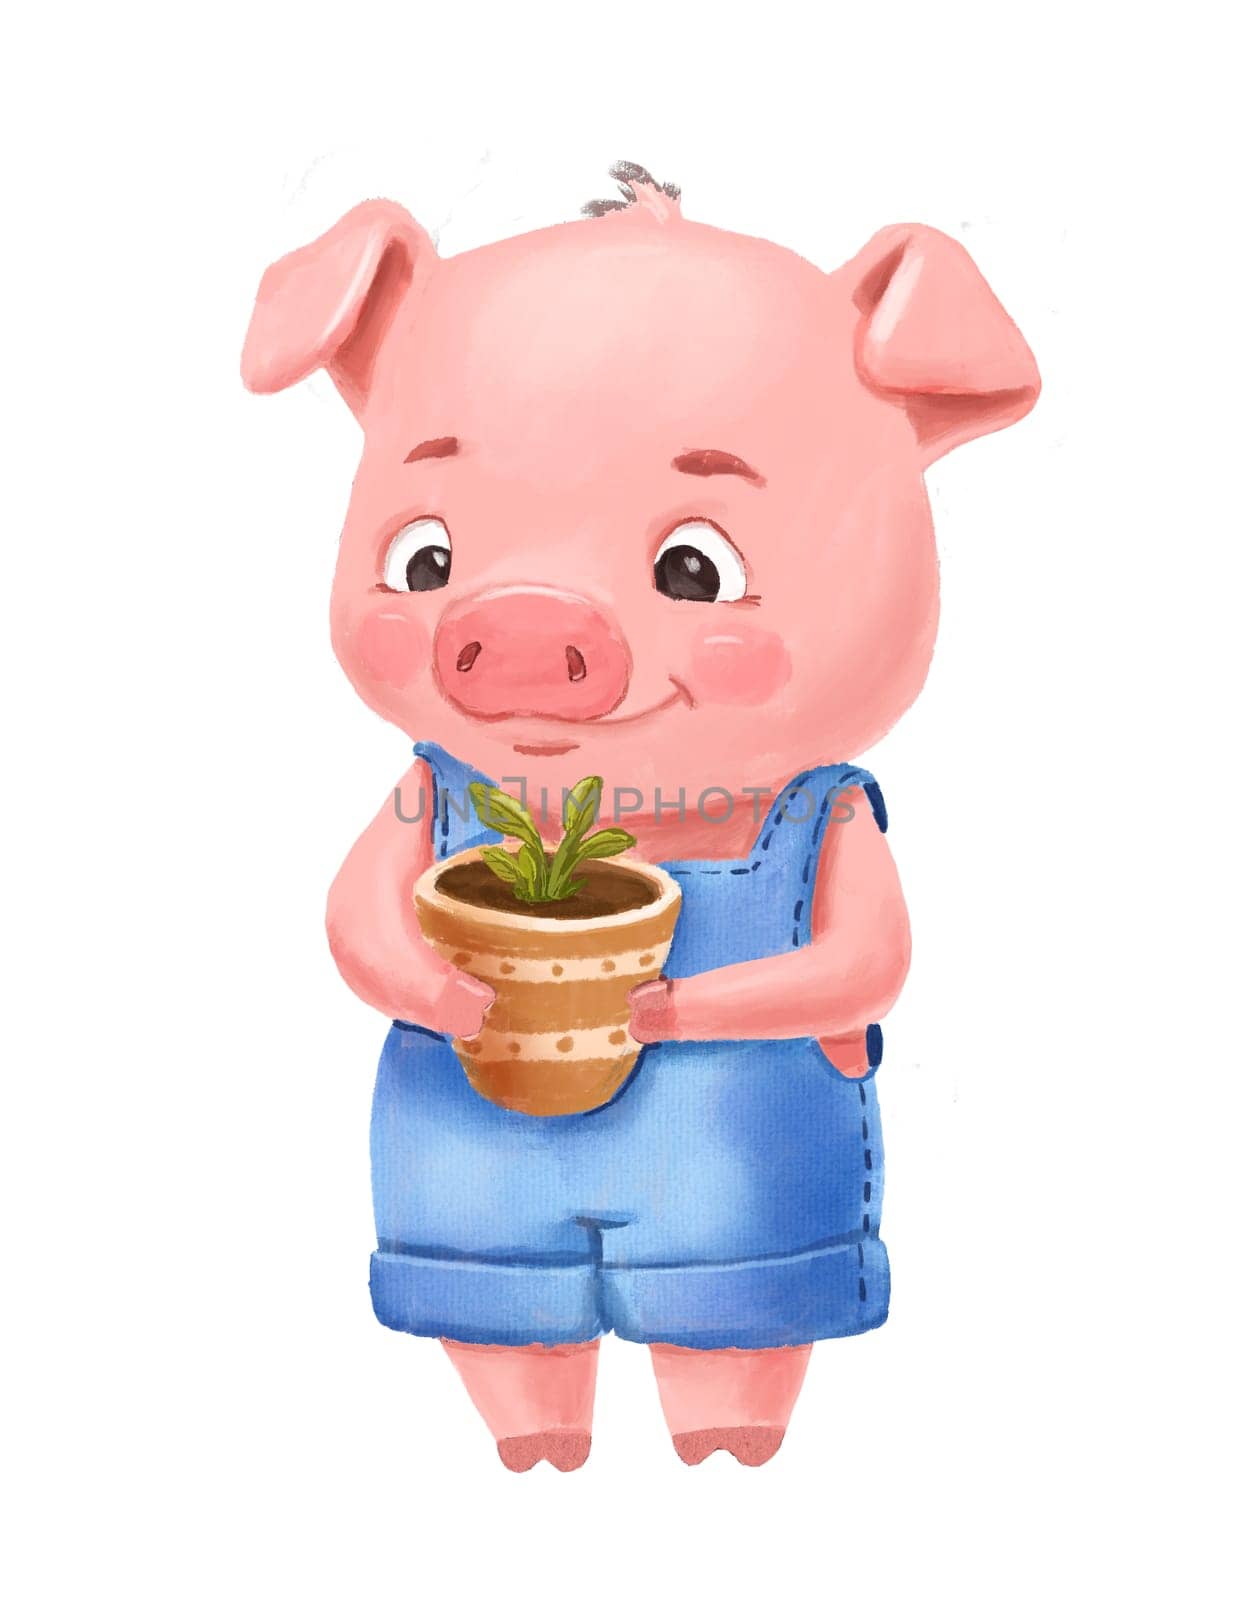 Cute smiling piglet boy with potted plant. Hand drawn illustration by ElenaPlatova